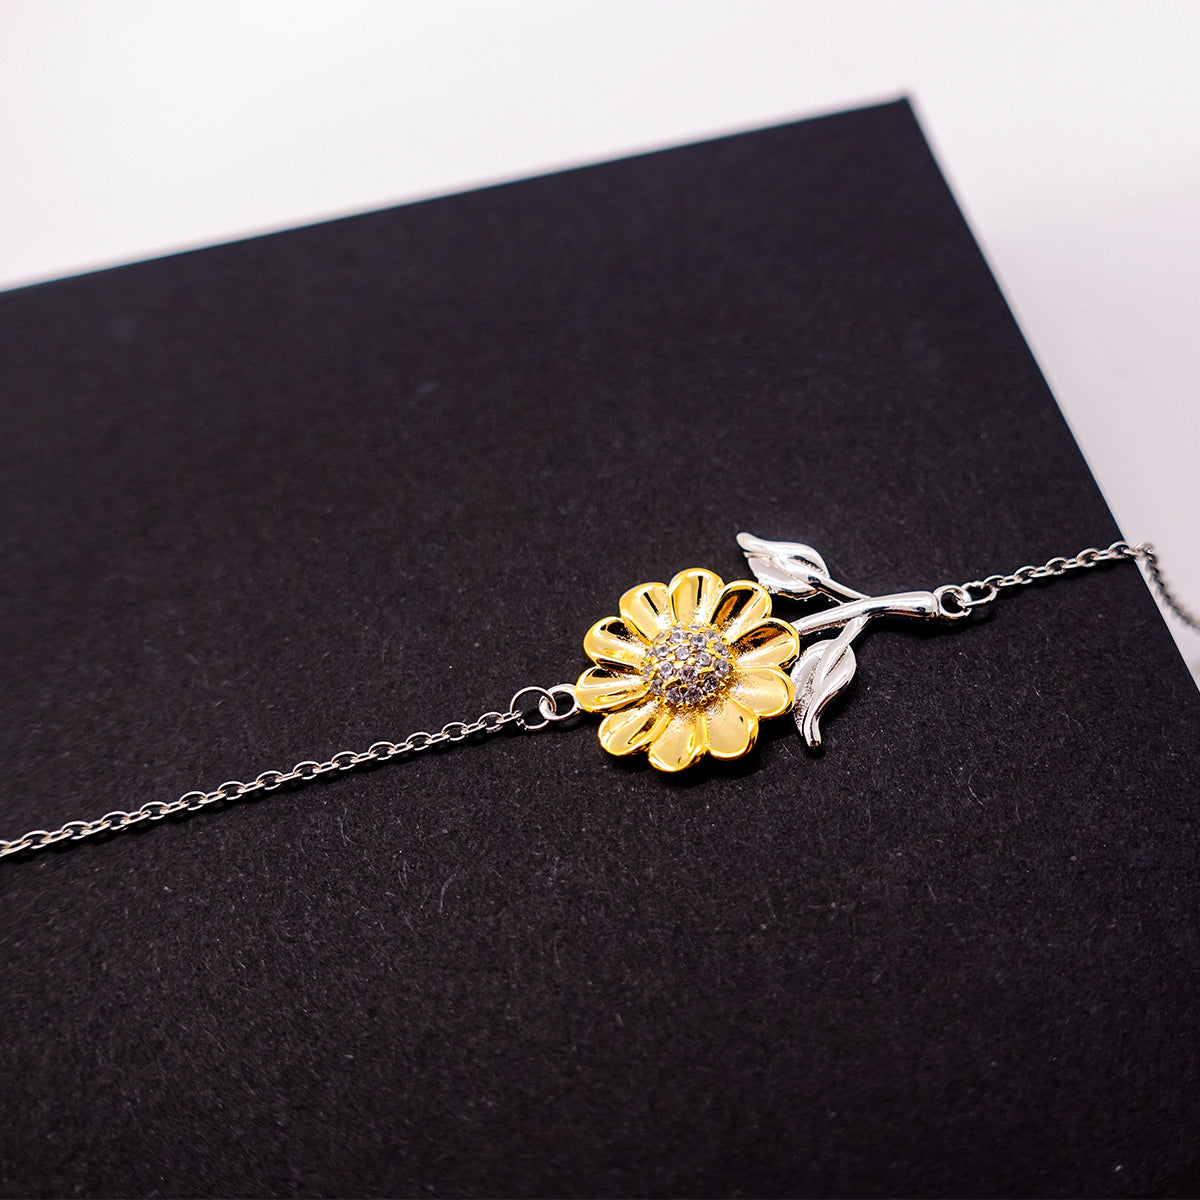 Proud Mixologist Gifts, Life's canvas is my masterpiece, Epic Birthday Christmas Unique Sunflower Bracelet For Mixologist, Coworkers, Men, Women, Friends